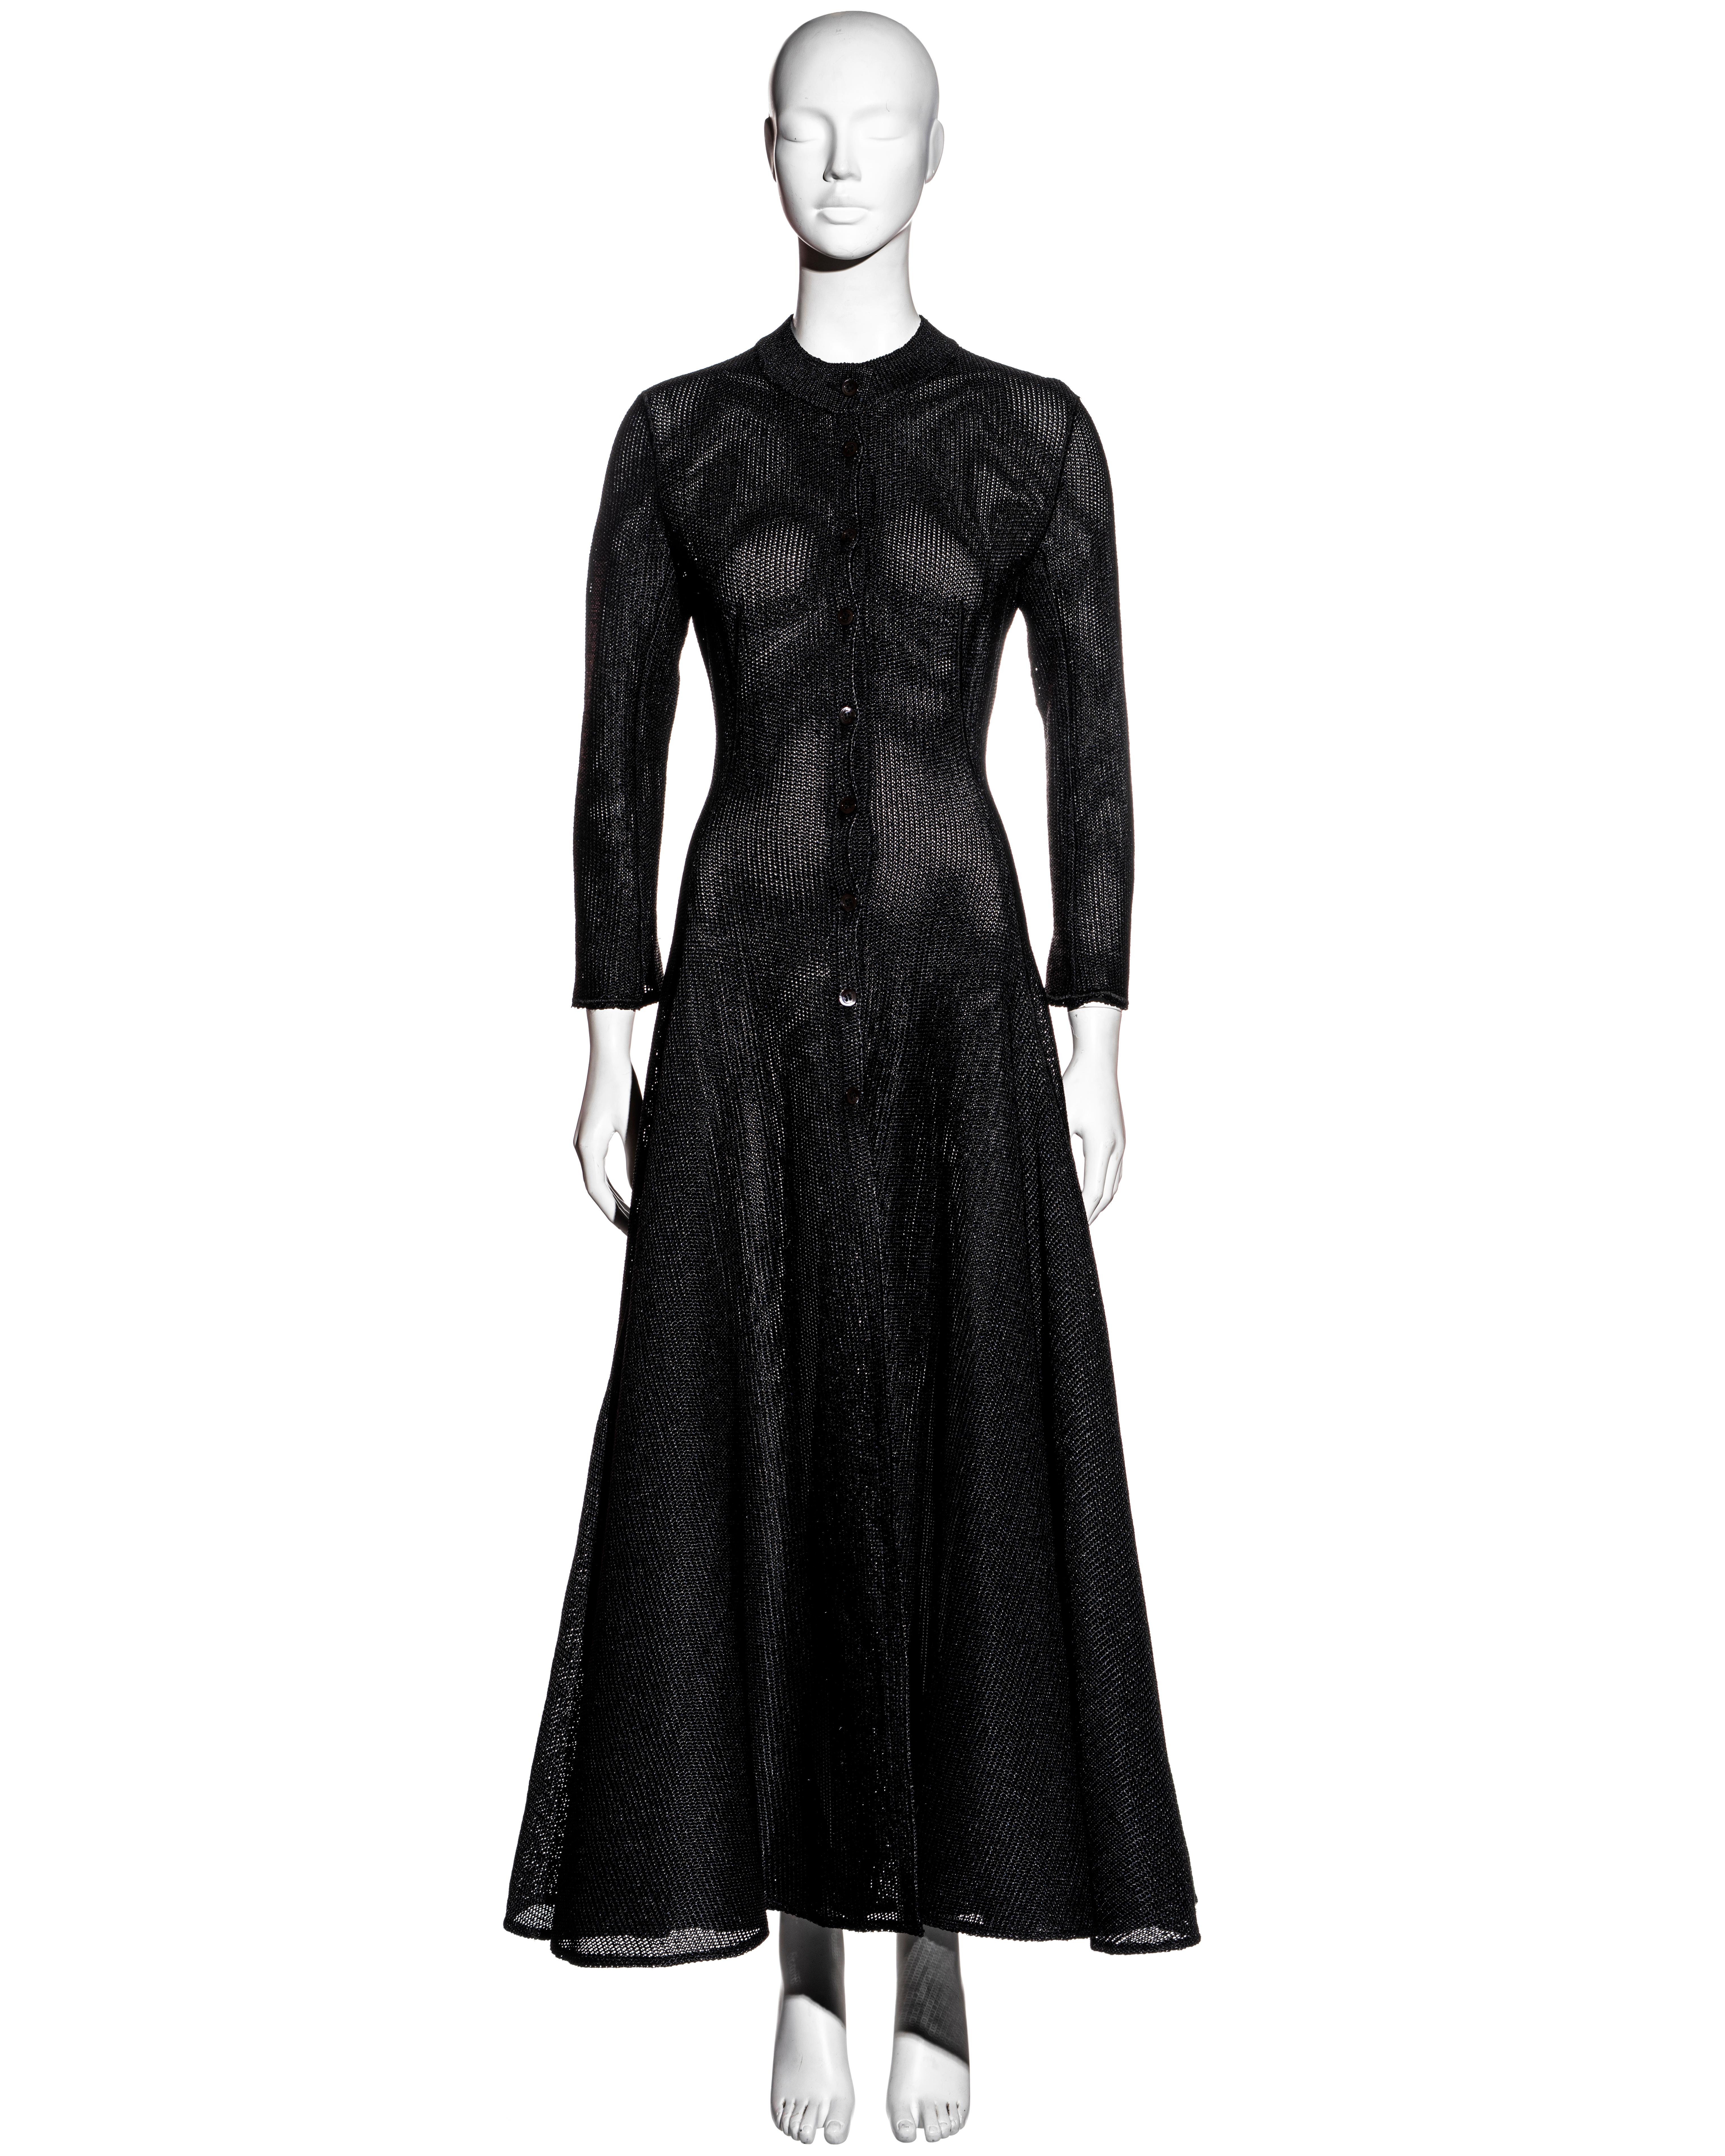 ▪ Azzedine Alaia black raffia maxi dress
▪ Front button fastenings 
▪ Long sleeves with flared cuffs 
▪ Structured a-line maxi skirt 
▪ Curved seams at the bodice 
▪ Drop waist 
▪ 100% Rayon
▪ Size Small
▪ Spring-Summer 1996